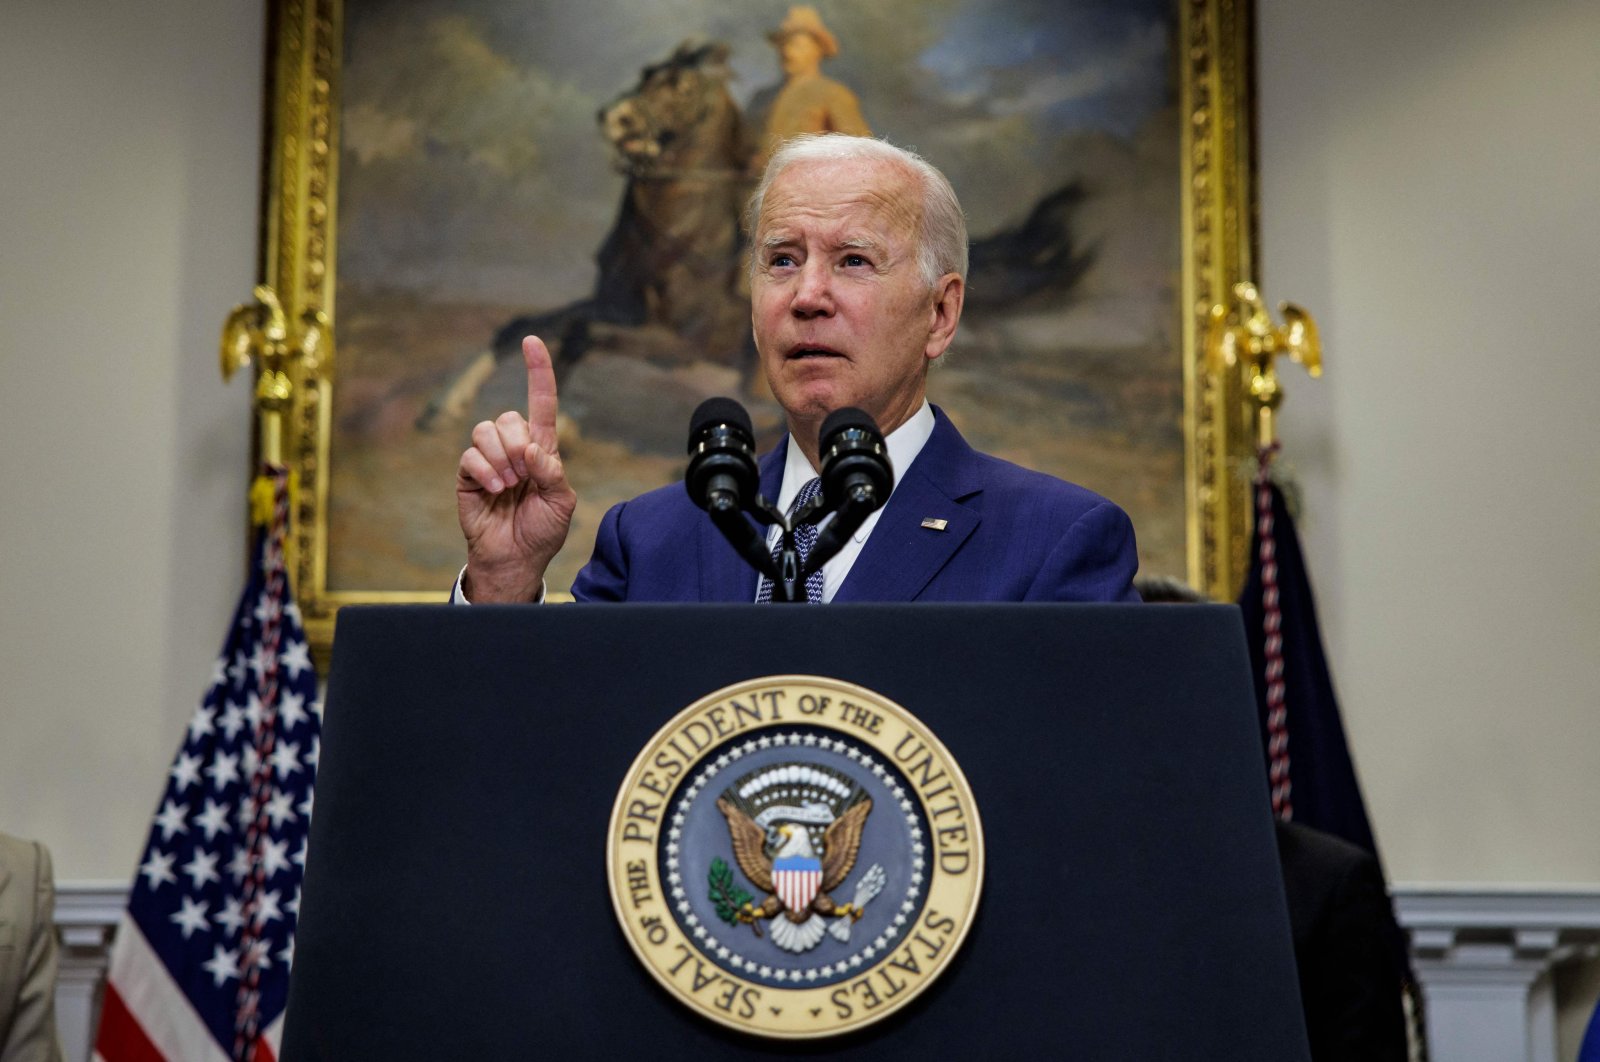 U.S. President Joe Biden speaks before signing an executive order protecting access to reproductive health care services, the White House, Washington, D.C., U.S., July 8, 2022. (AFP Photo)